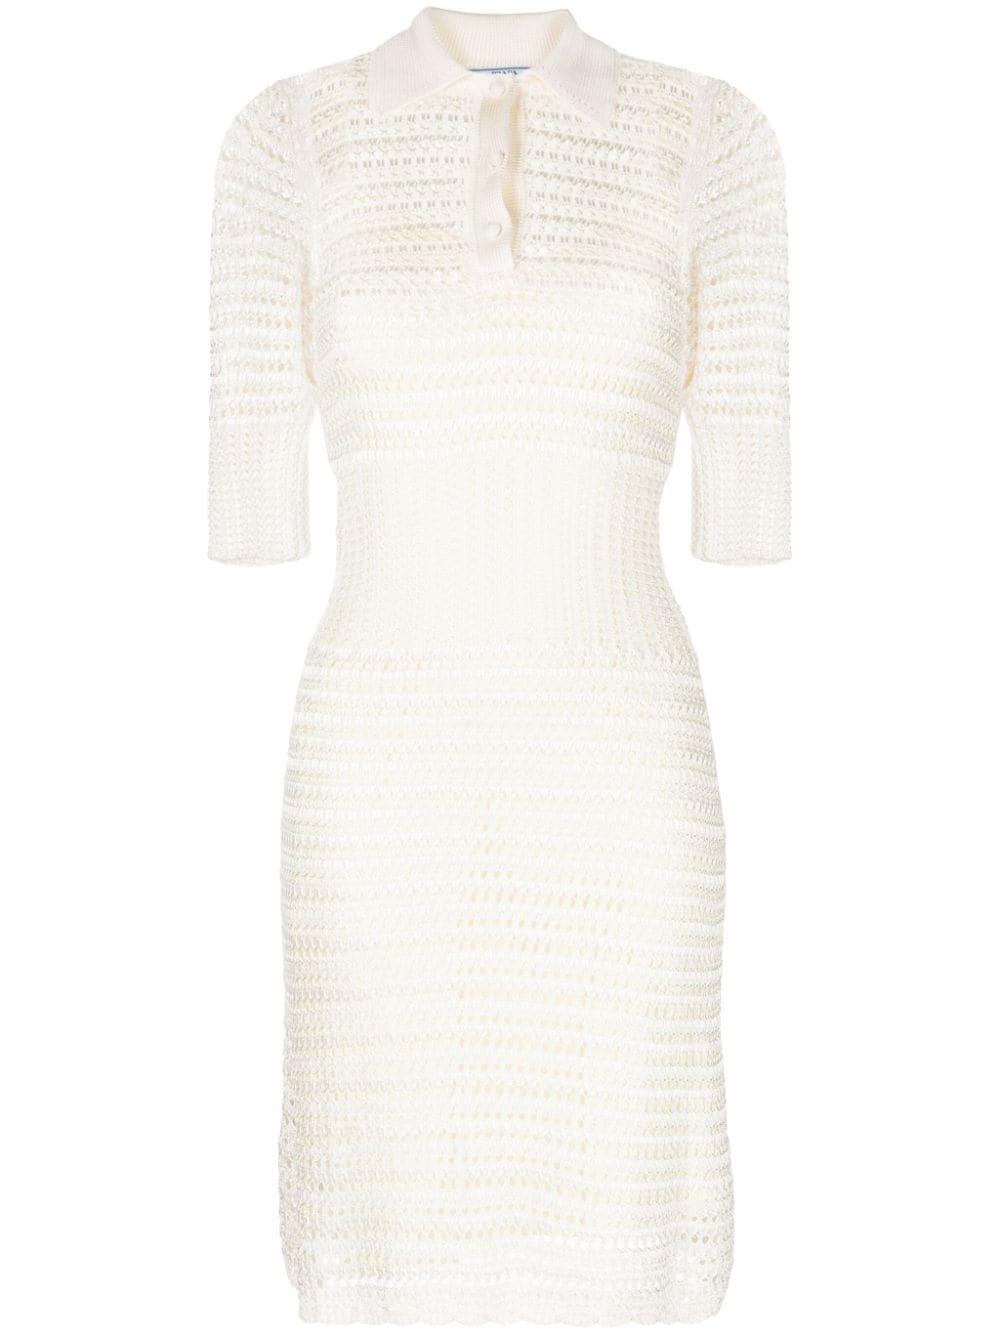 Prada Pre-Owned crochet-knit fitted dress - Neutrals